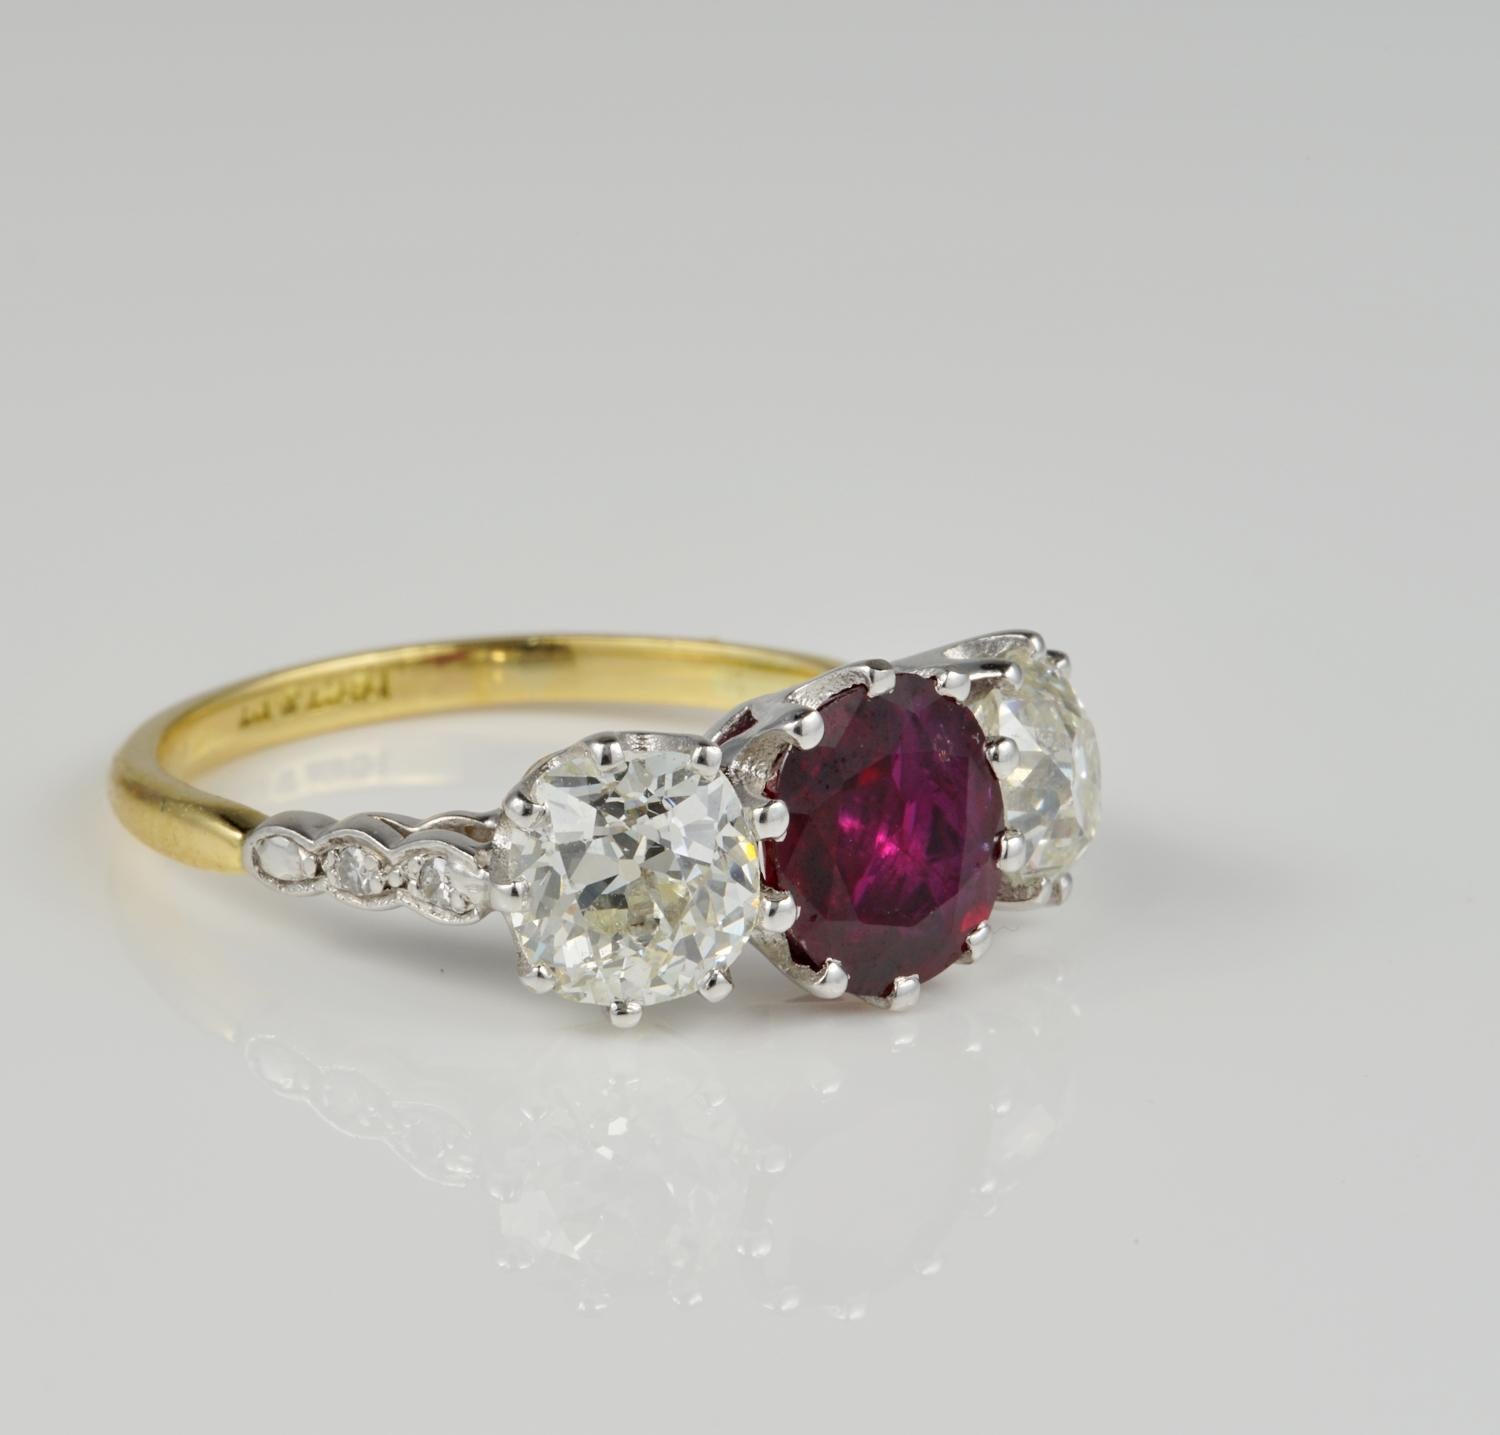 An important, authentic Edwardian Ruby and Diamond ring, in exquisite and unique trilogy version, dating 1900 ca.
Ring of this type can be counted as very few available worldwide, however this is one of the most exquisite between all
The very fine